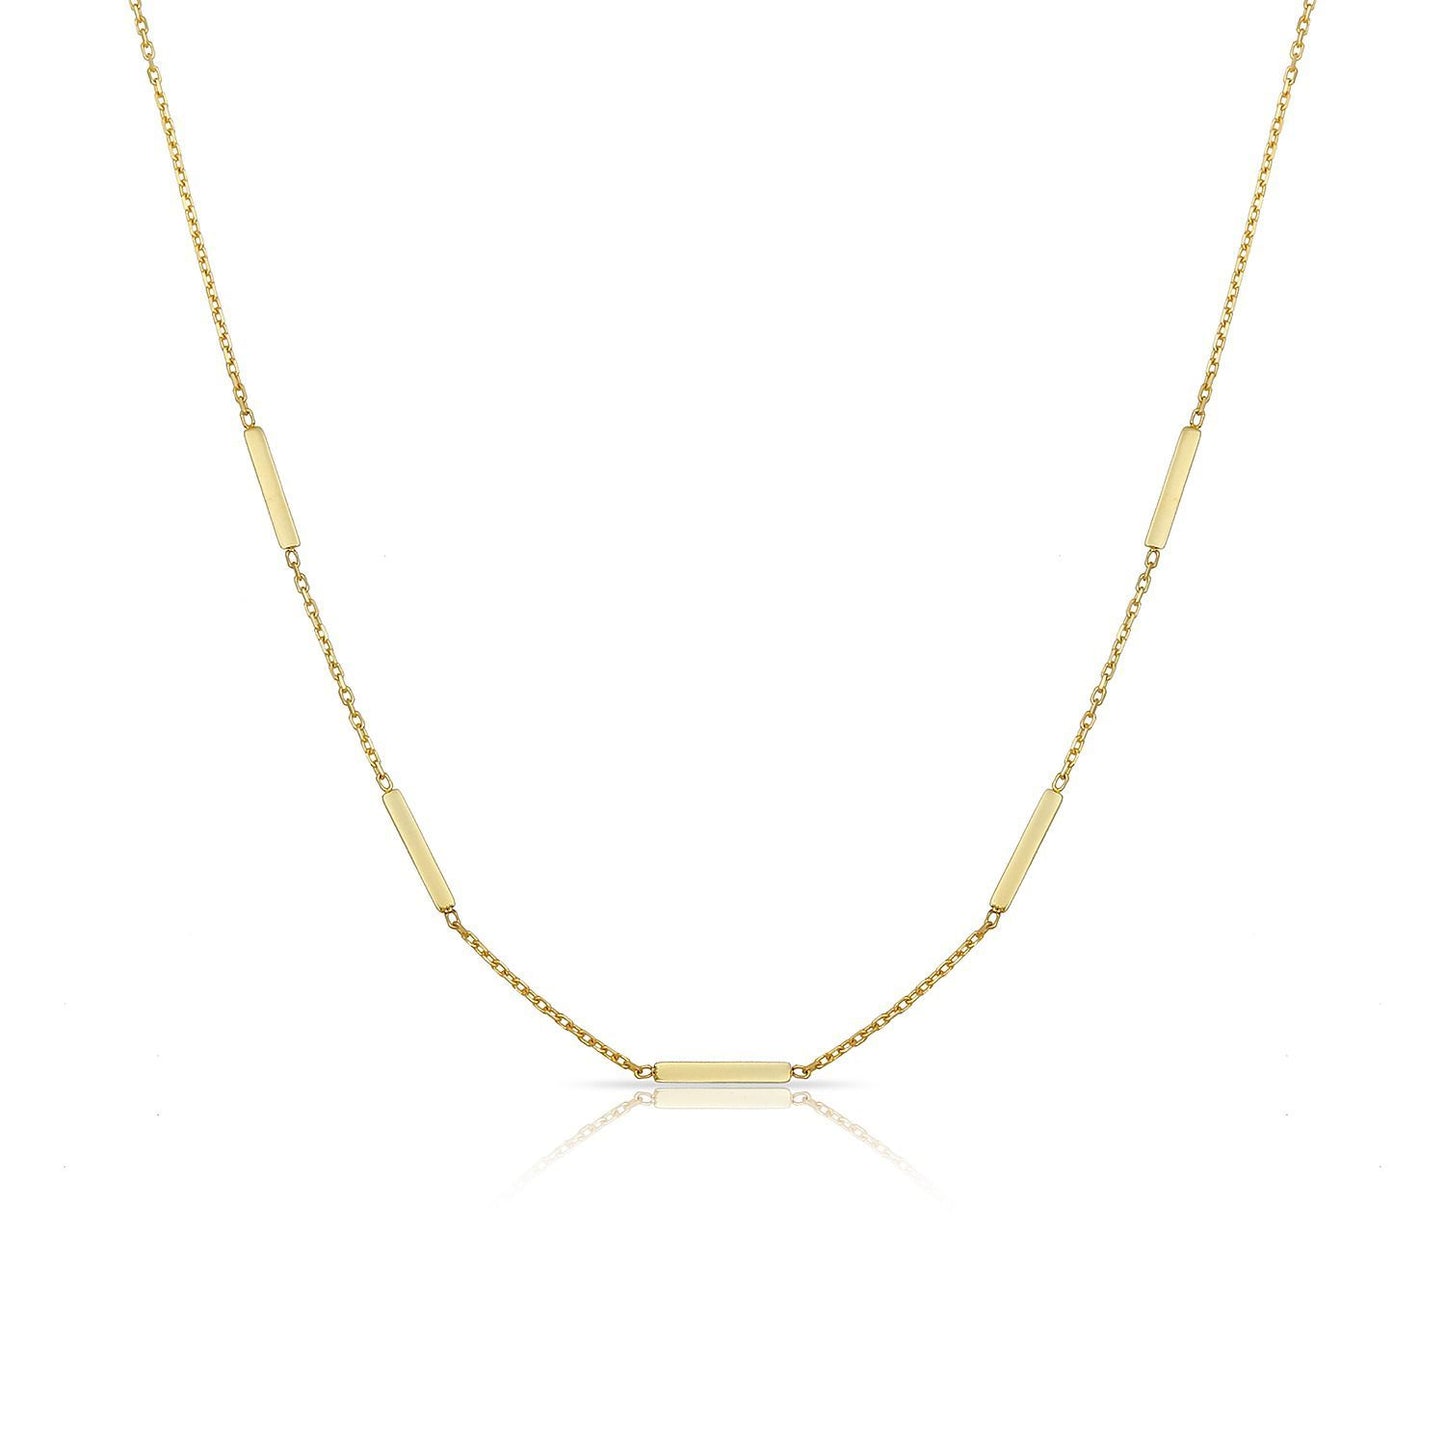 TSK 14k Gold Bars Necklace JEWELRY The Sis Kiss